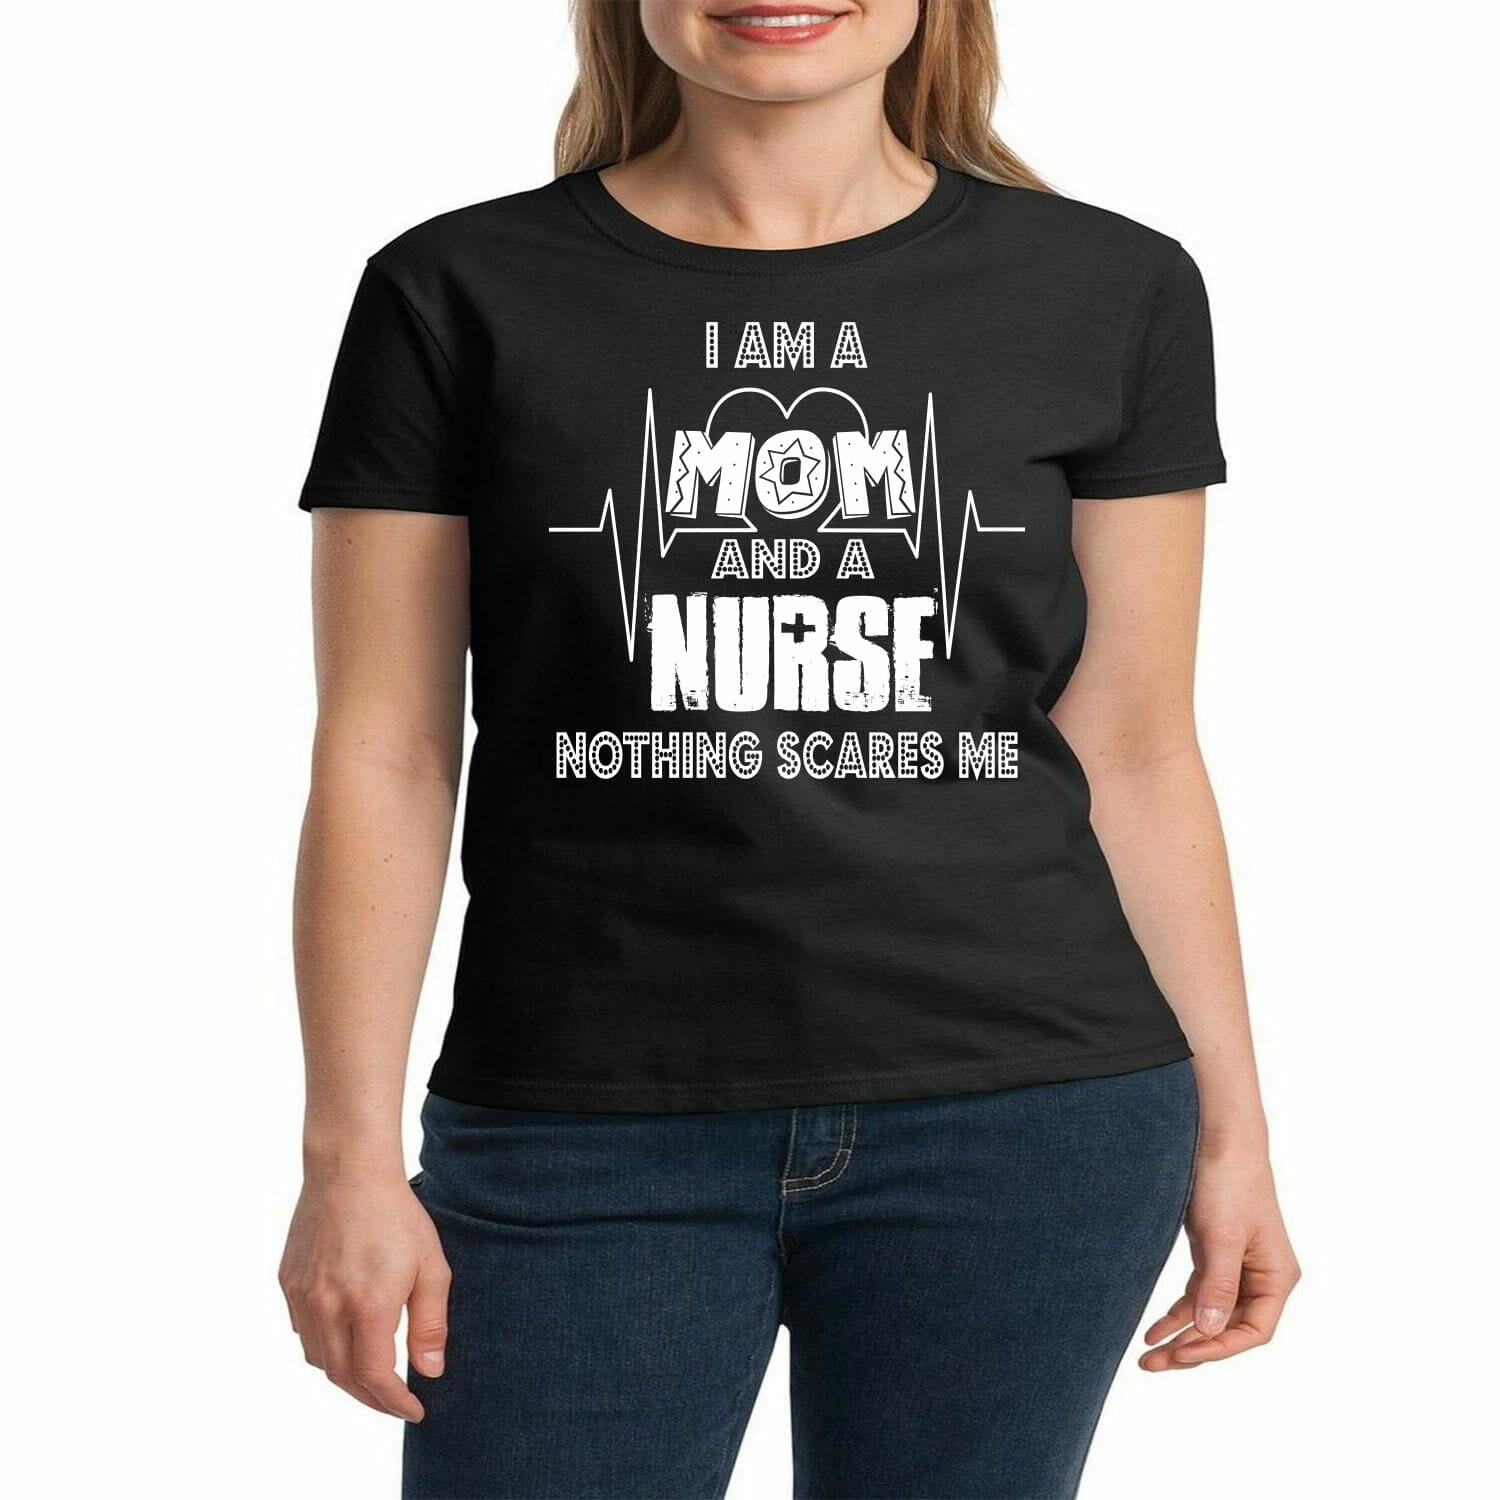 im a mom and a nurse nothing scares me tshirt design